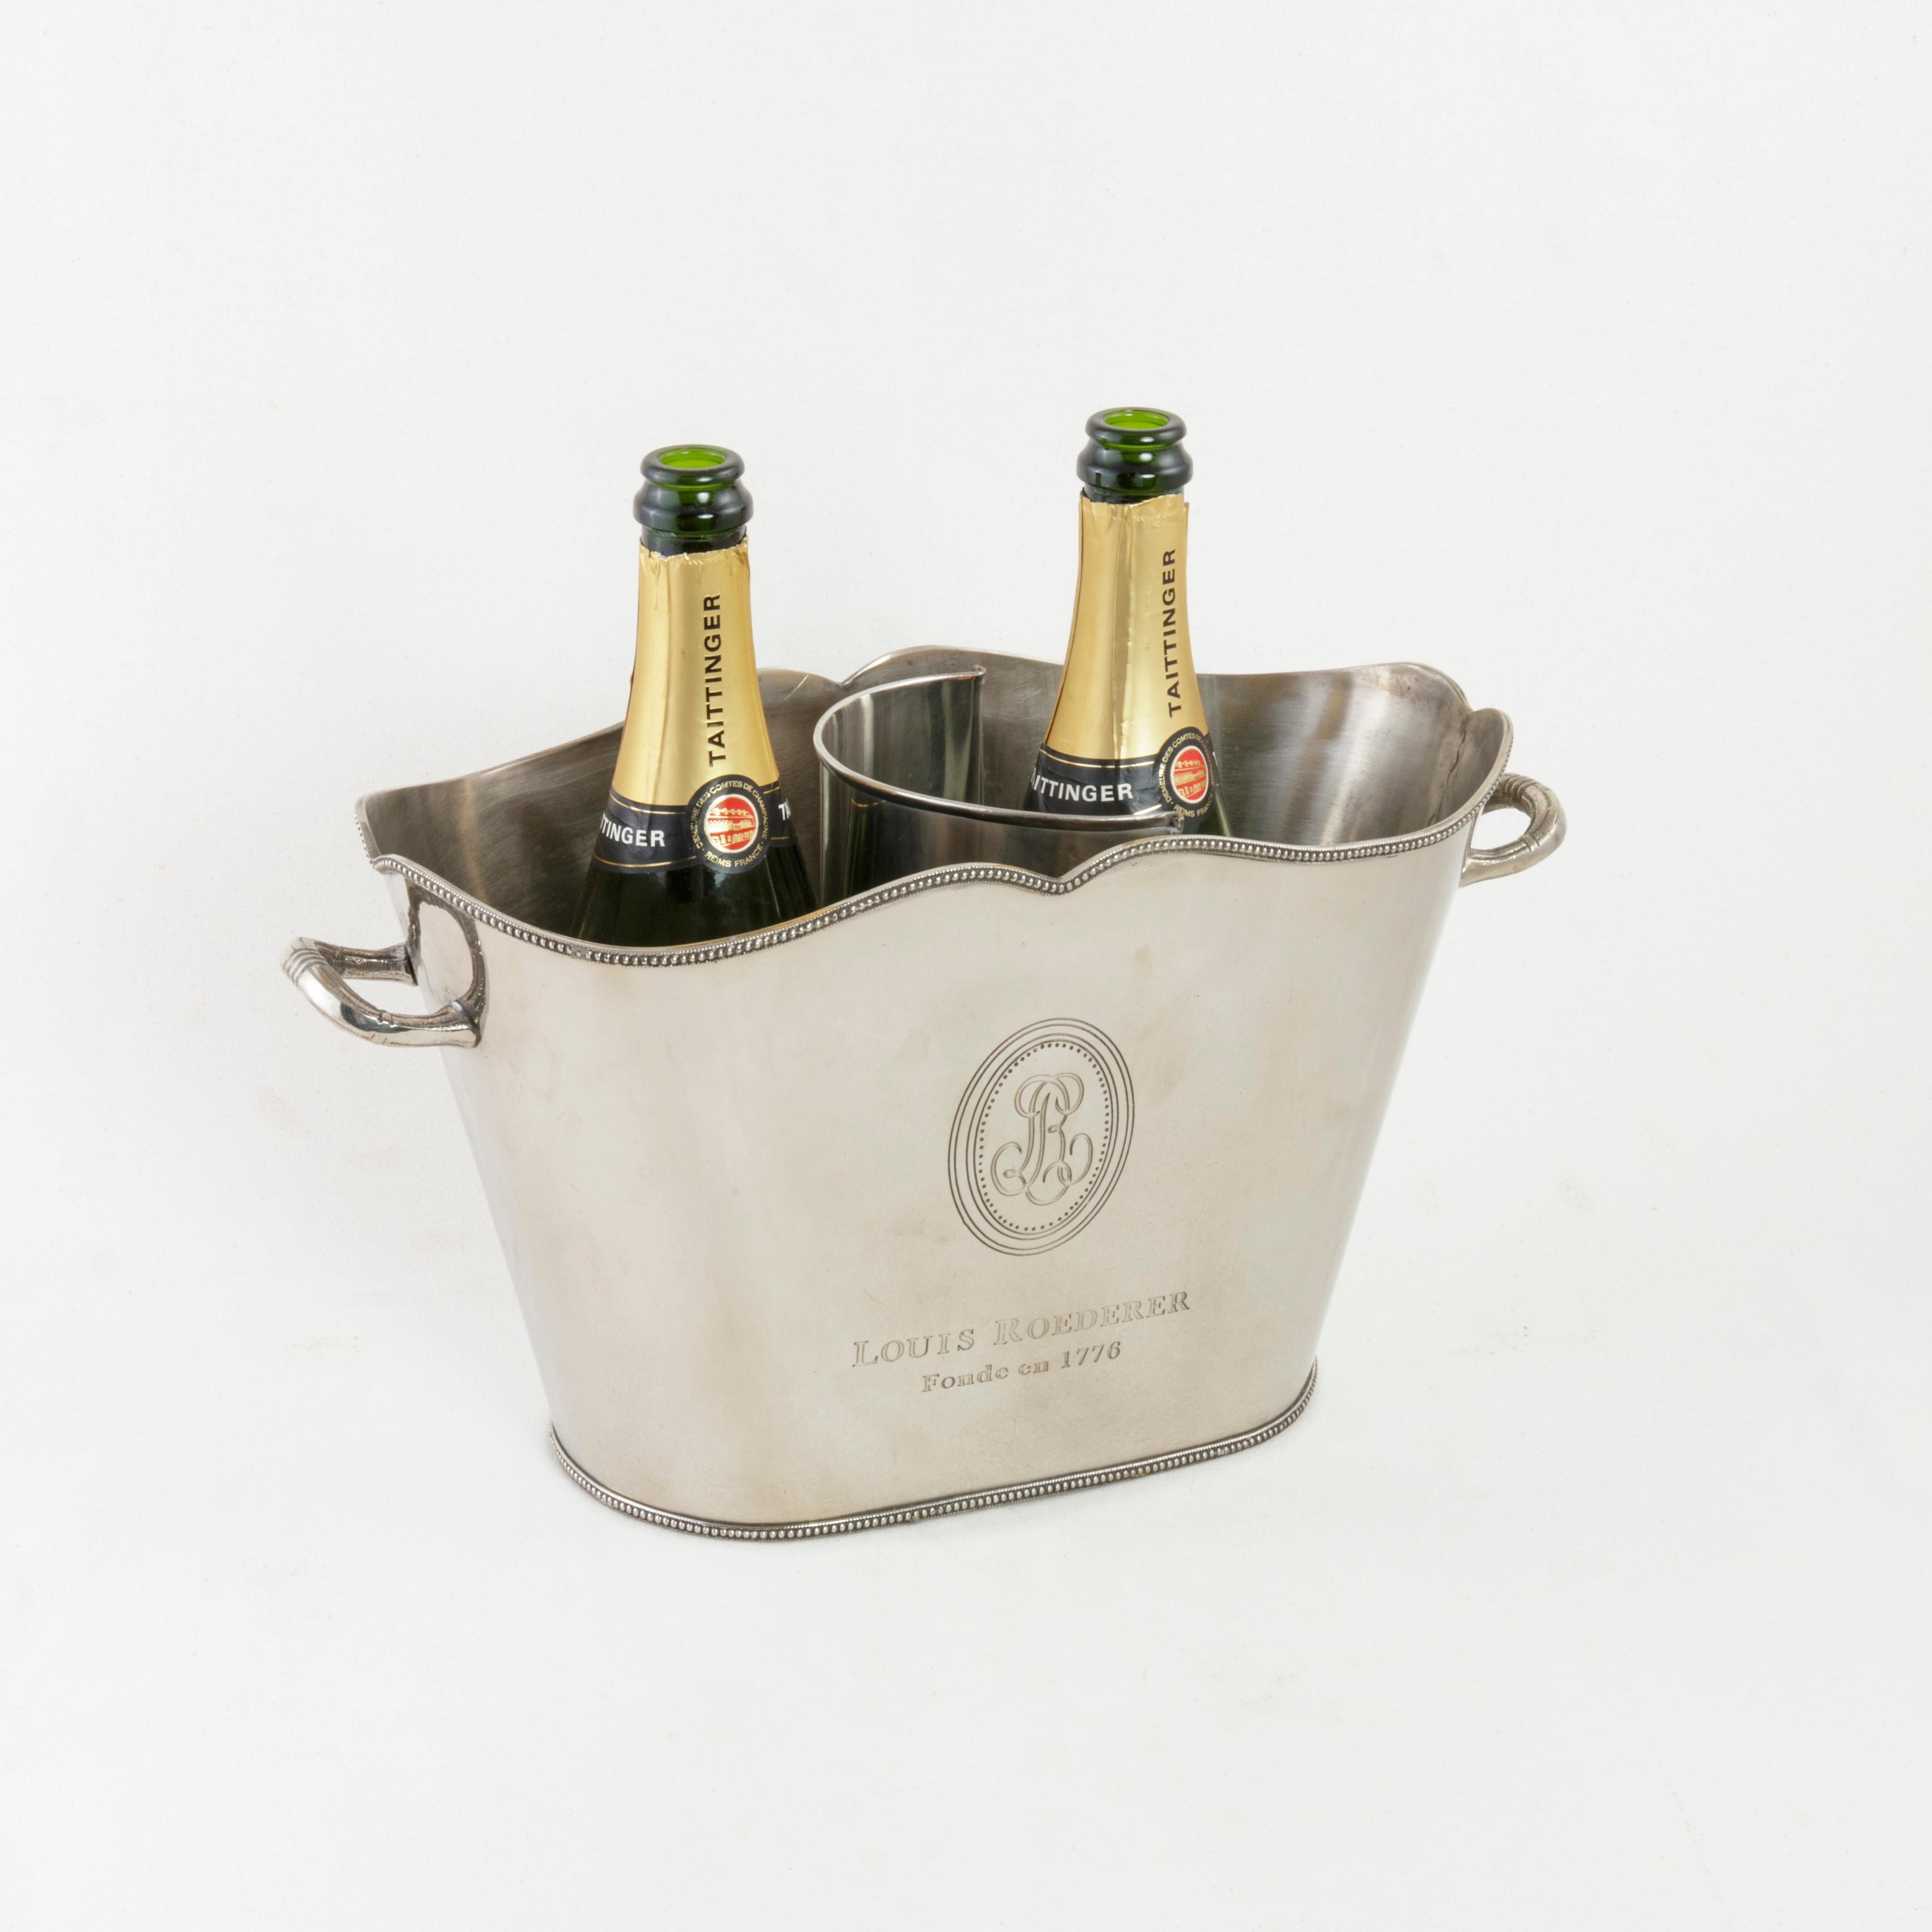 This unique French silver plate champagne bucket from the mid-20th century is marked Louis Roederer, Fonde en 1776, the name of the renowned champagne producer and the year of its establishment. With its unusual oval form detailed with beading